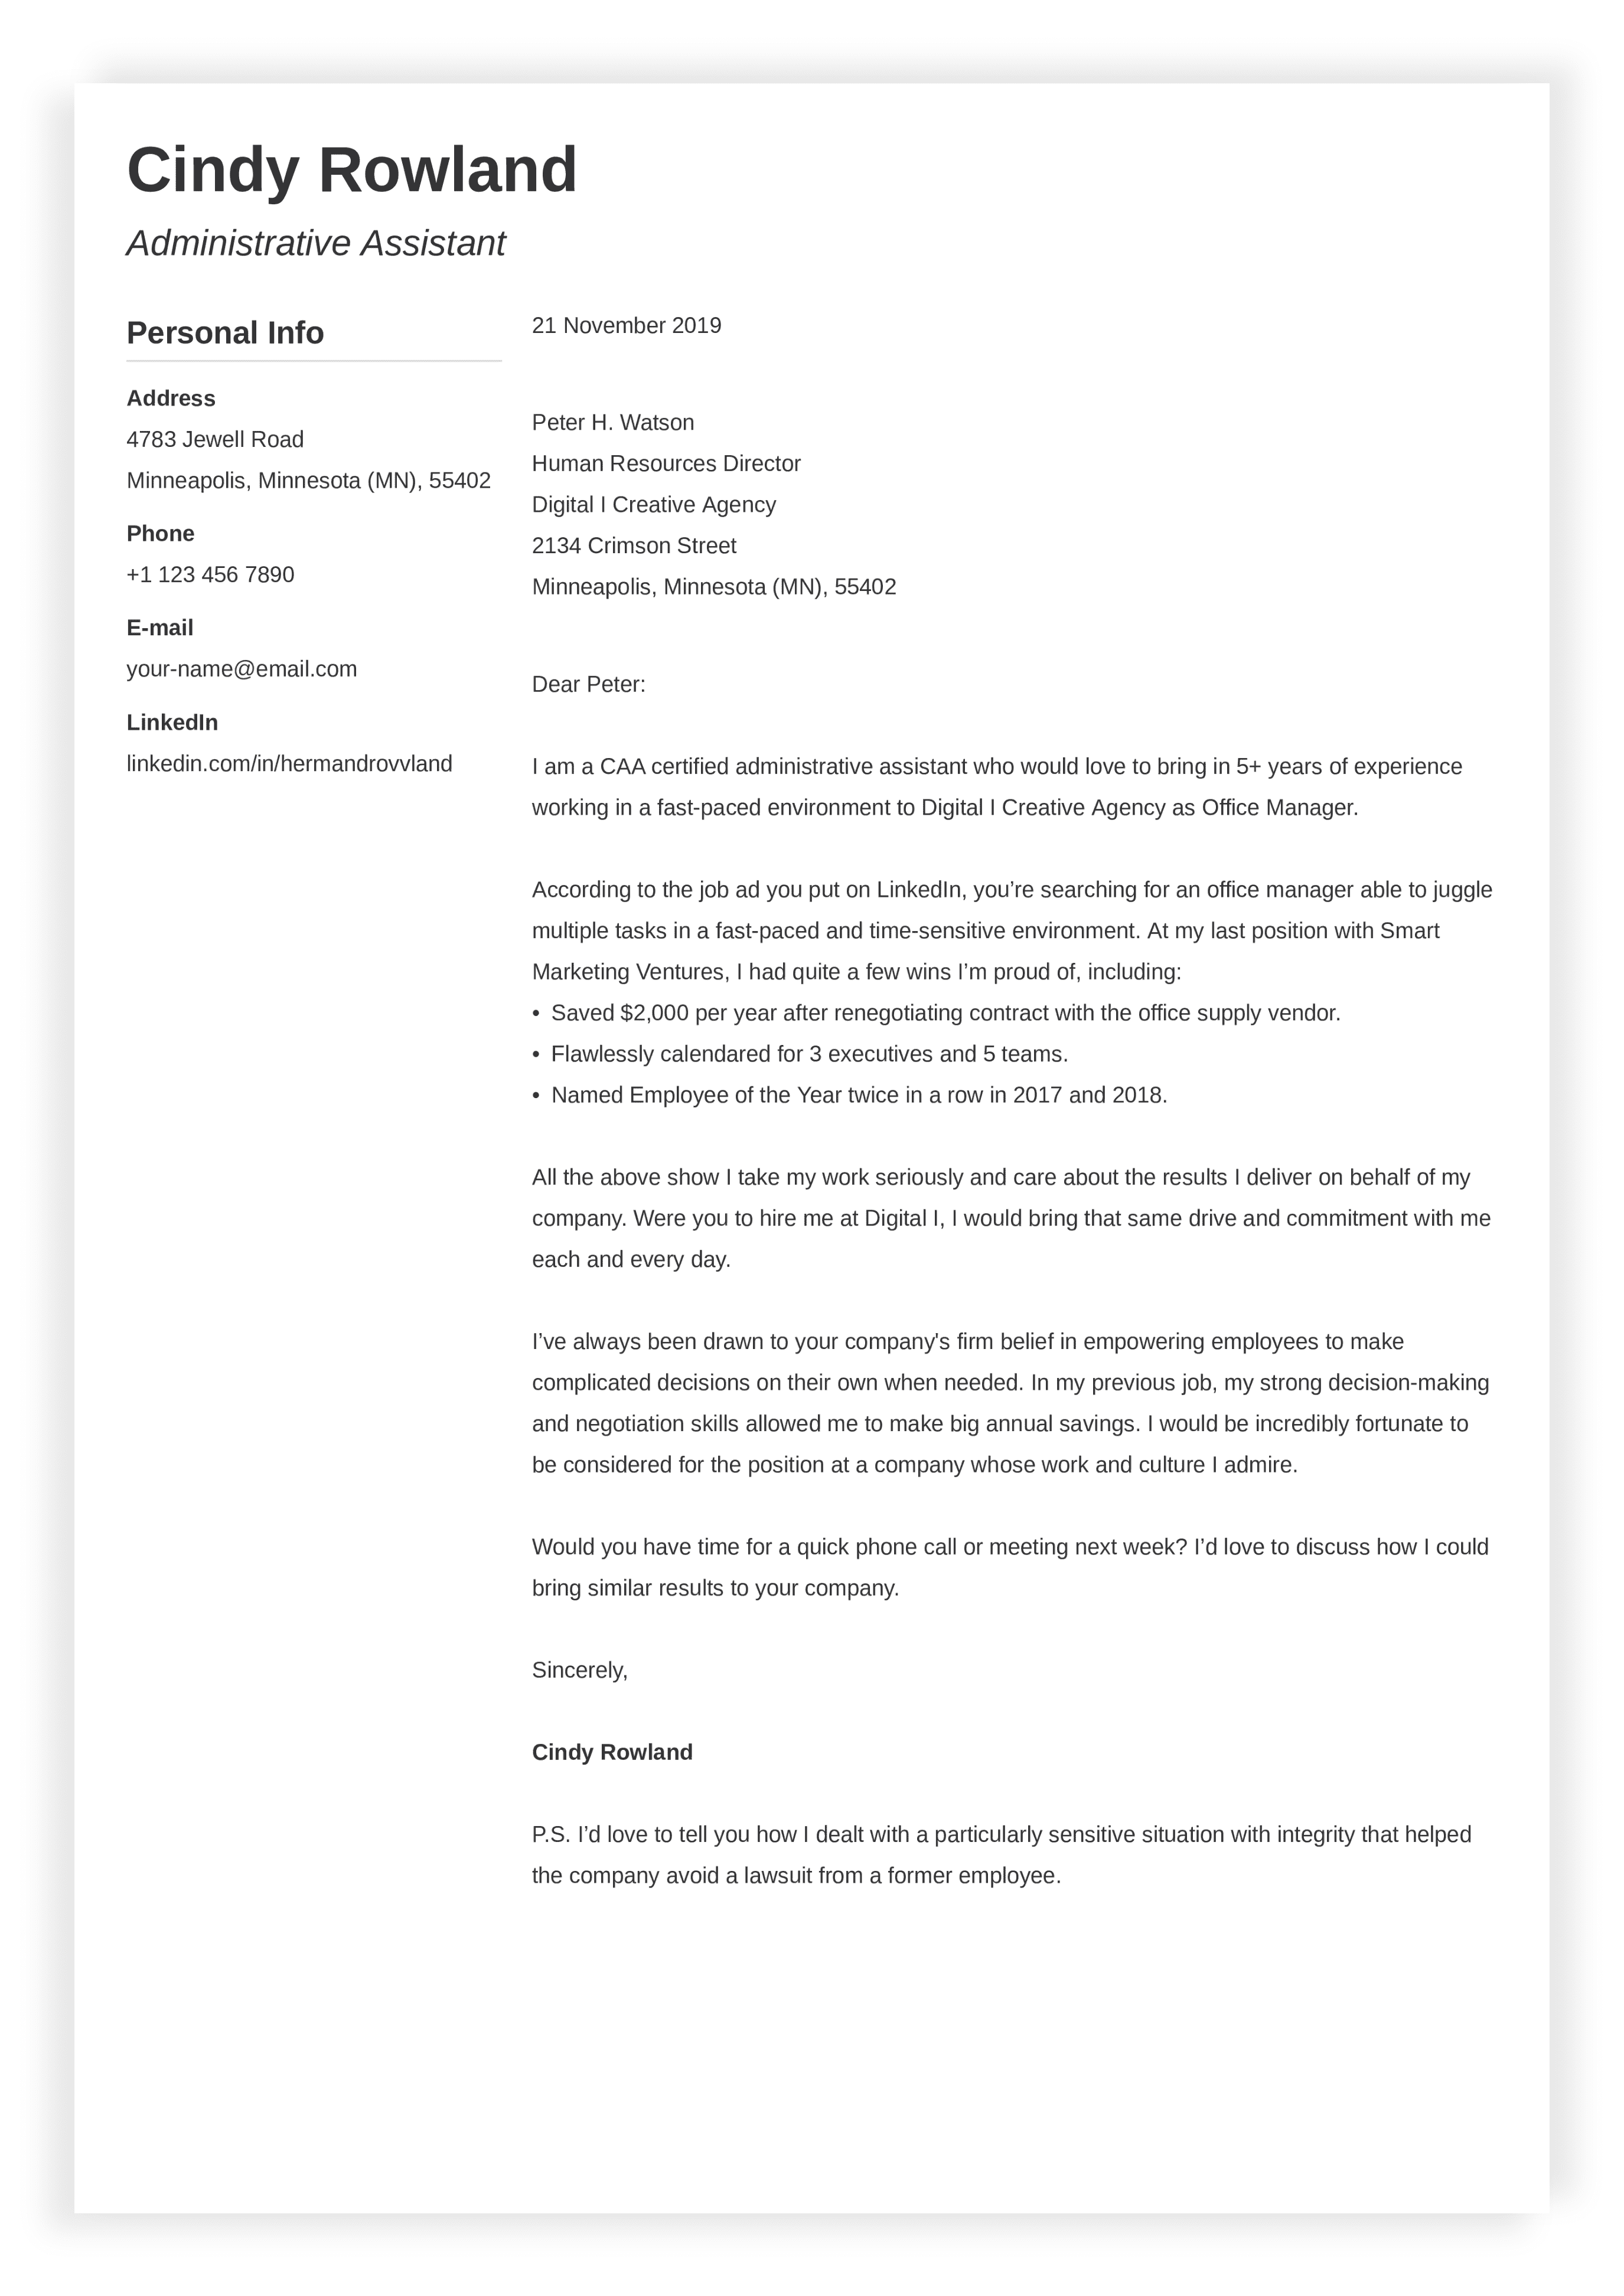 How to Write a Cover Letter for a Job in 2021 (12+ Examples)